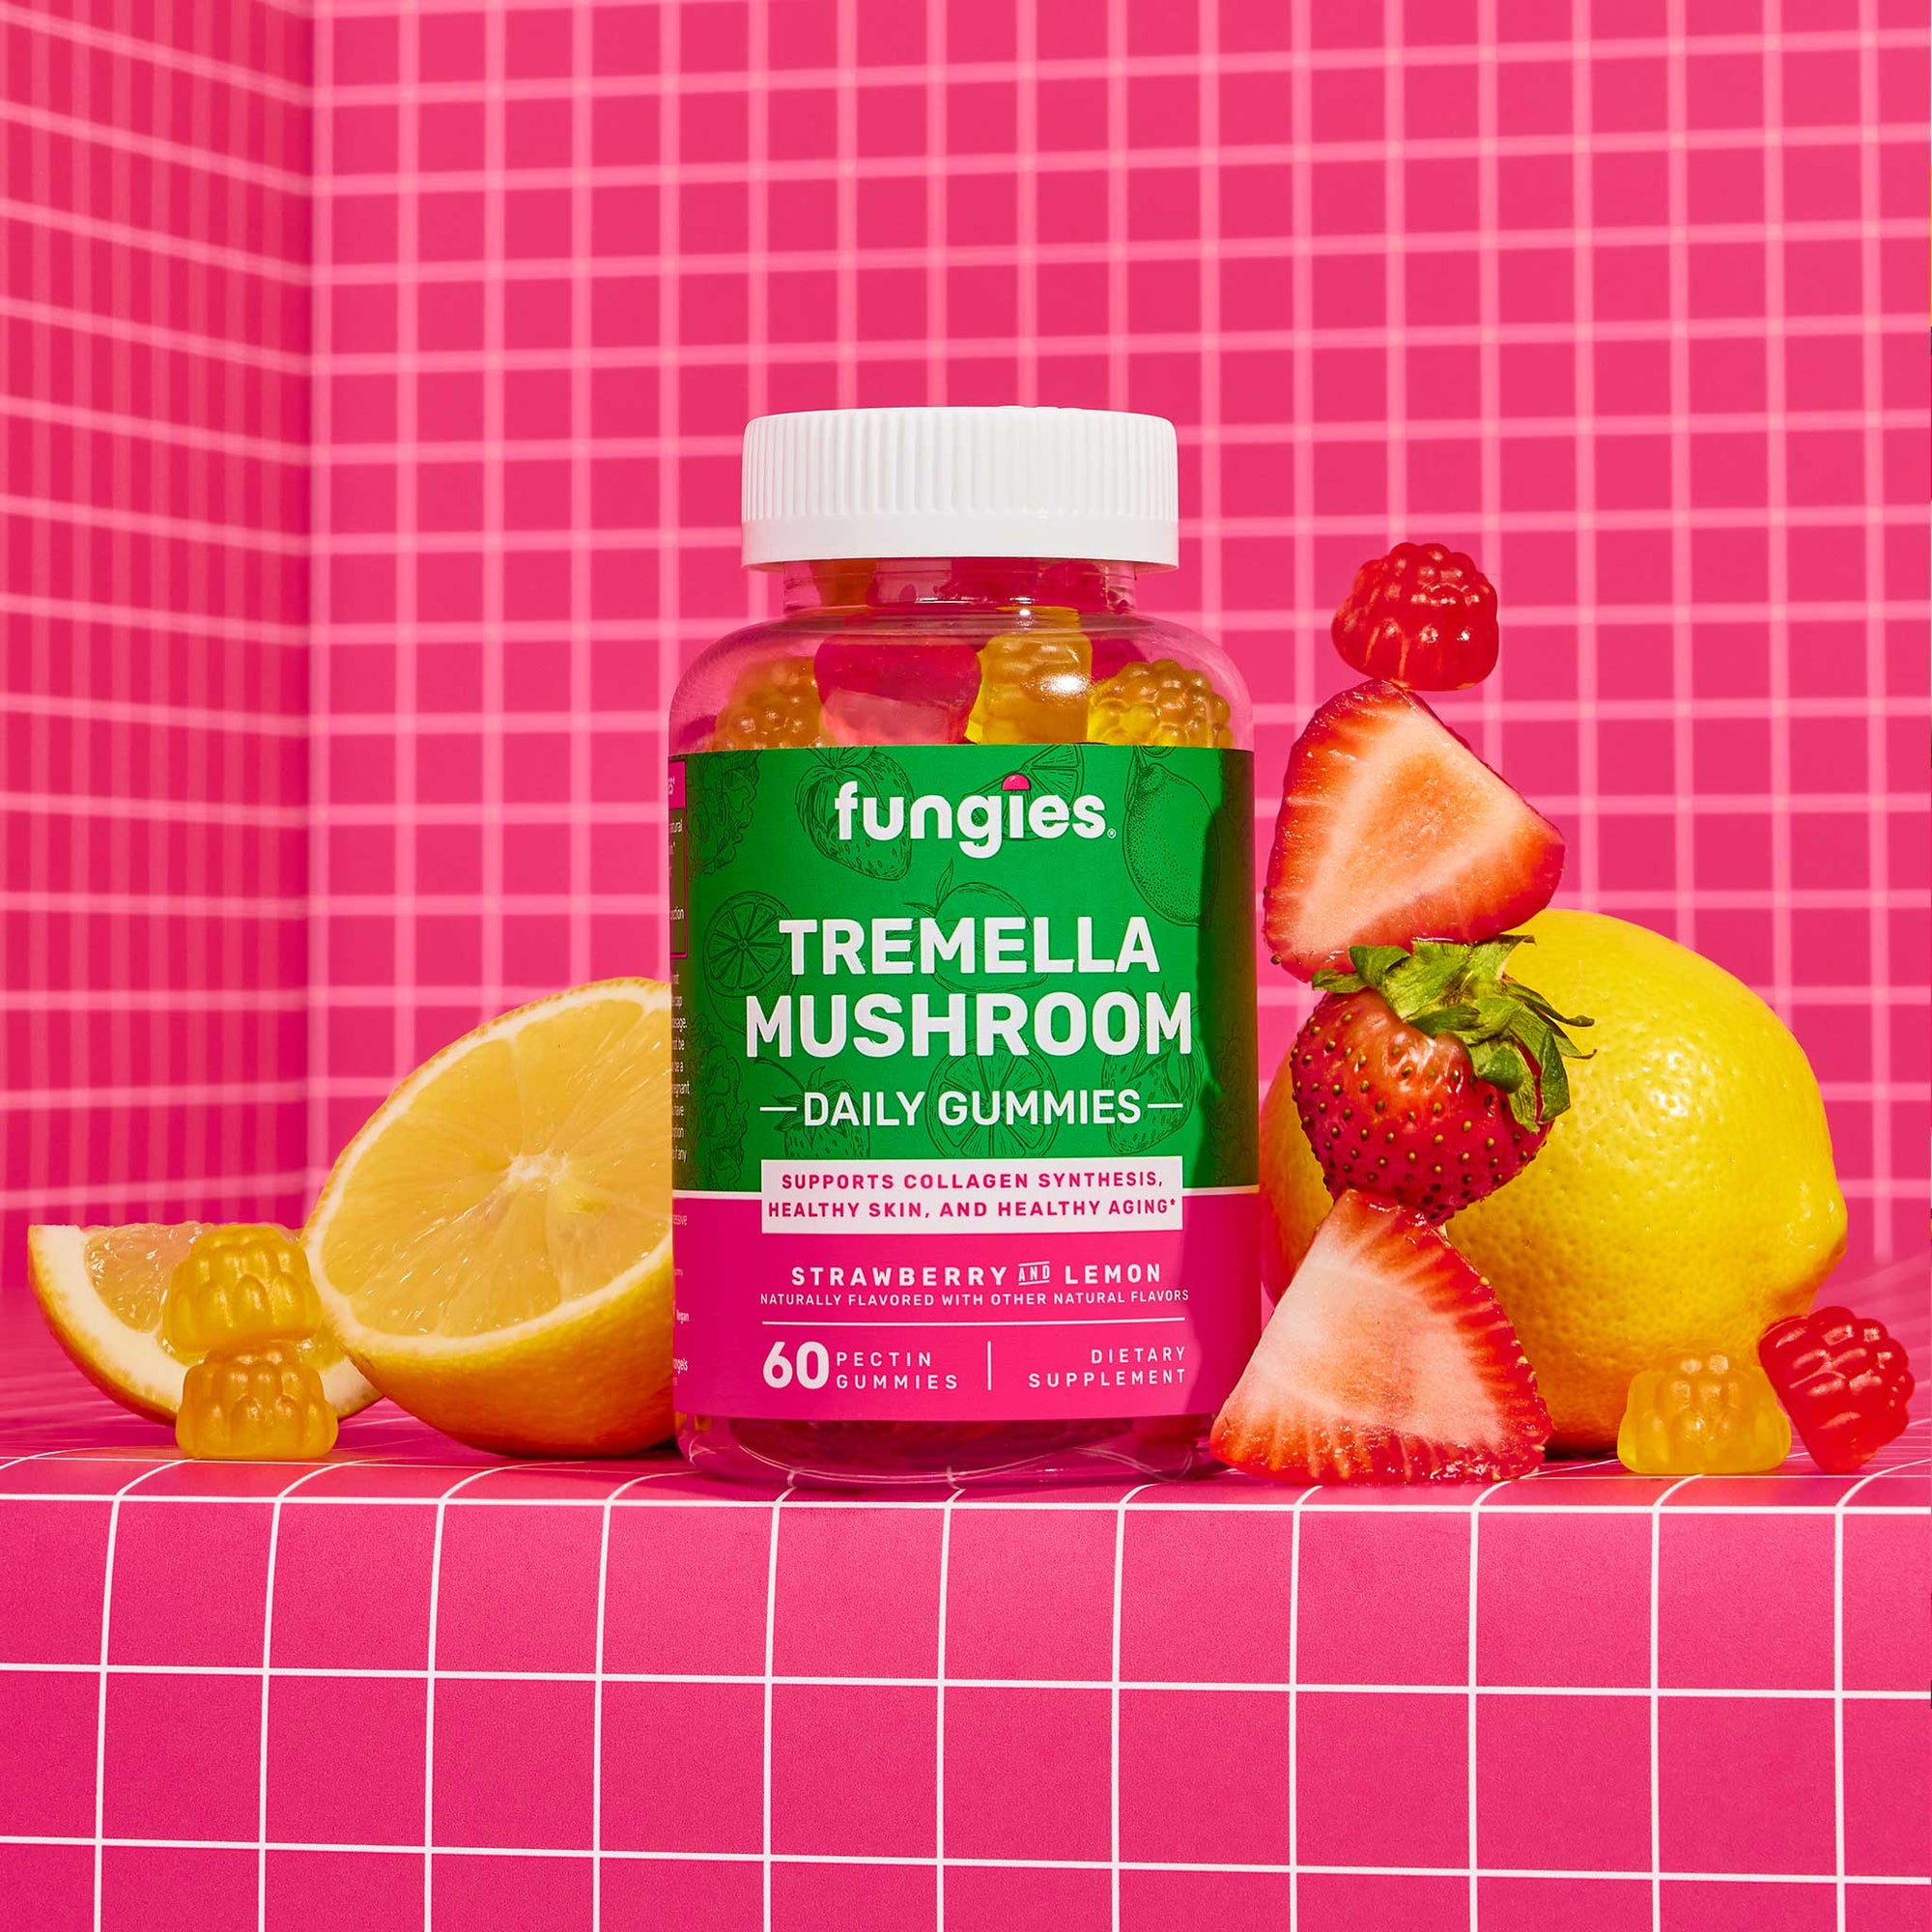 Fungies Tremella Mushroom Daily Gummies for Beauty Support Strawberry and Lemon Flavor